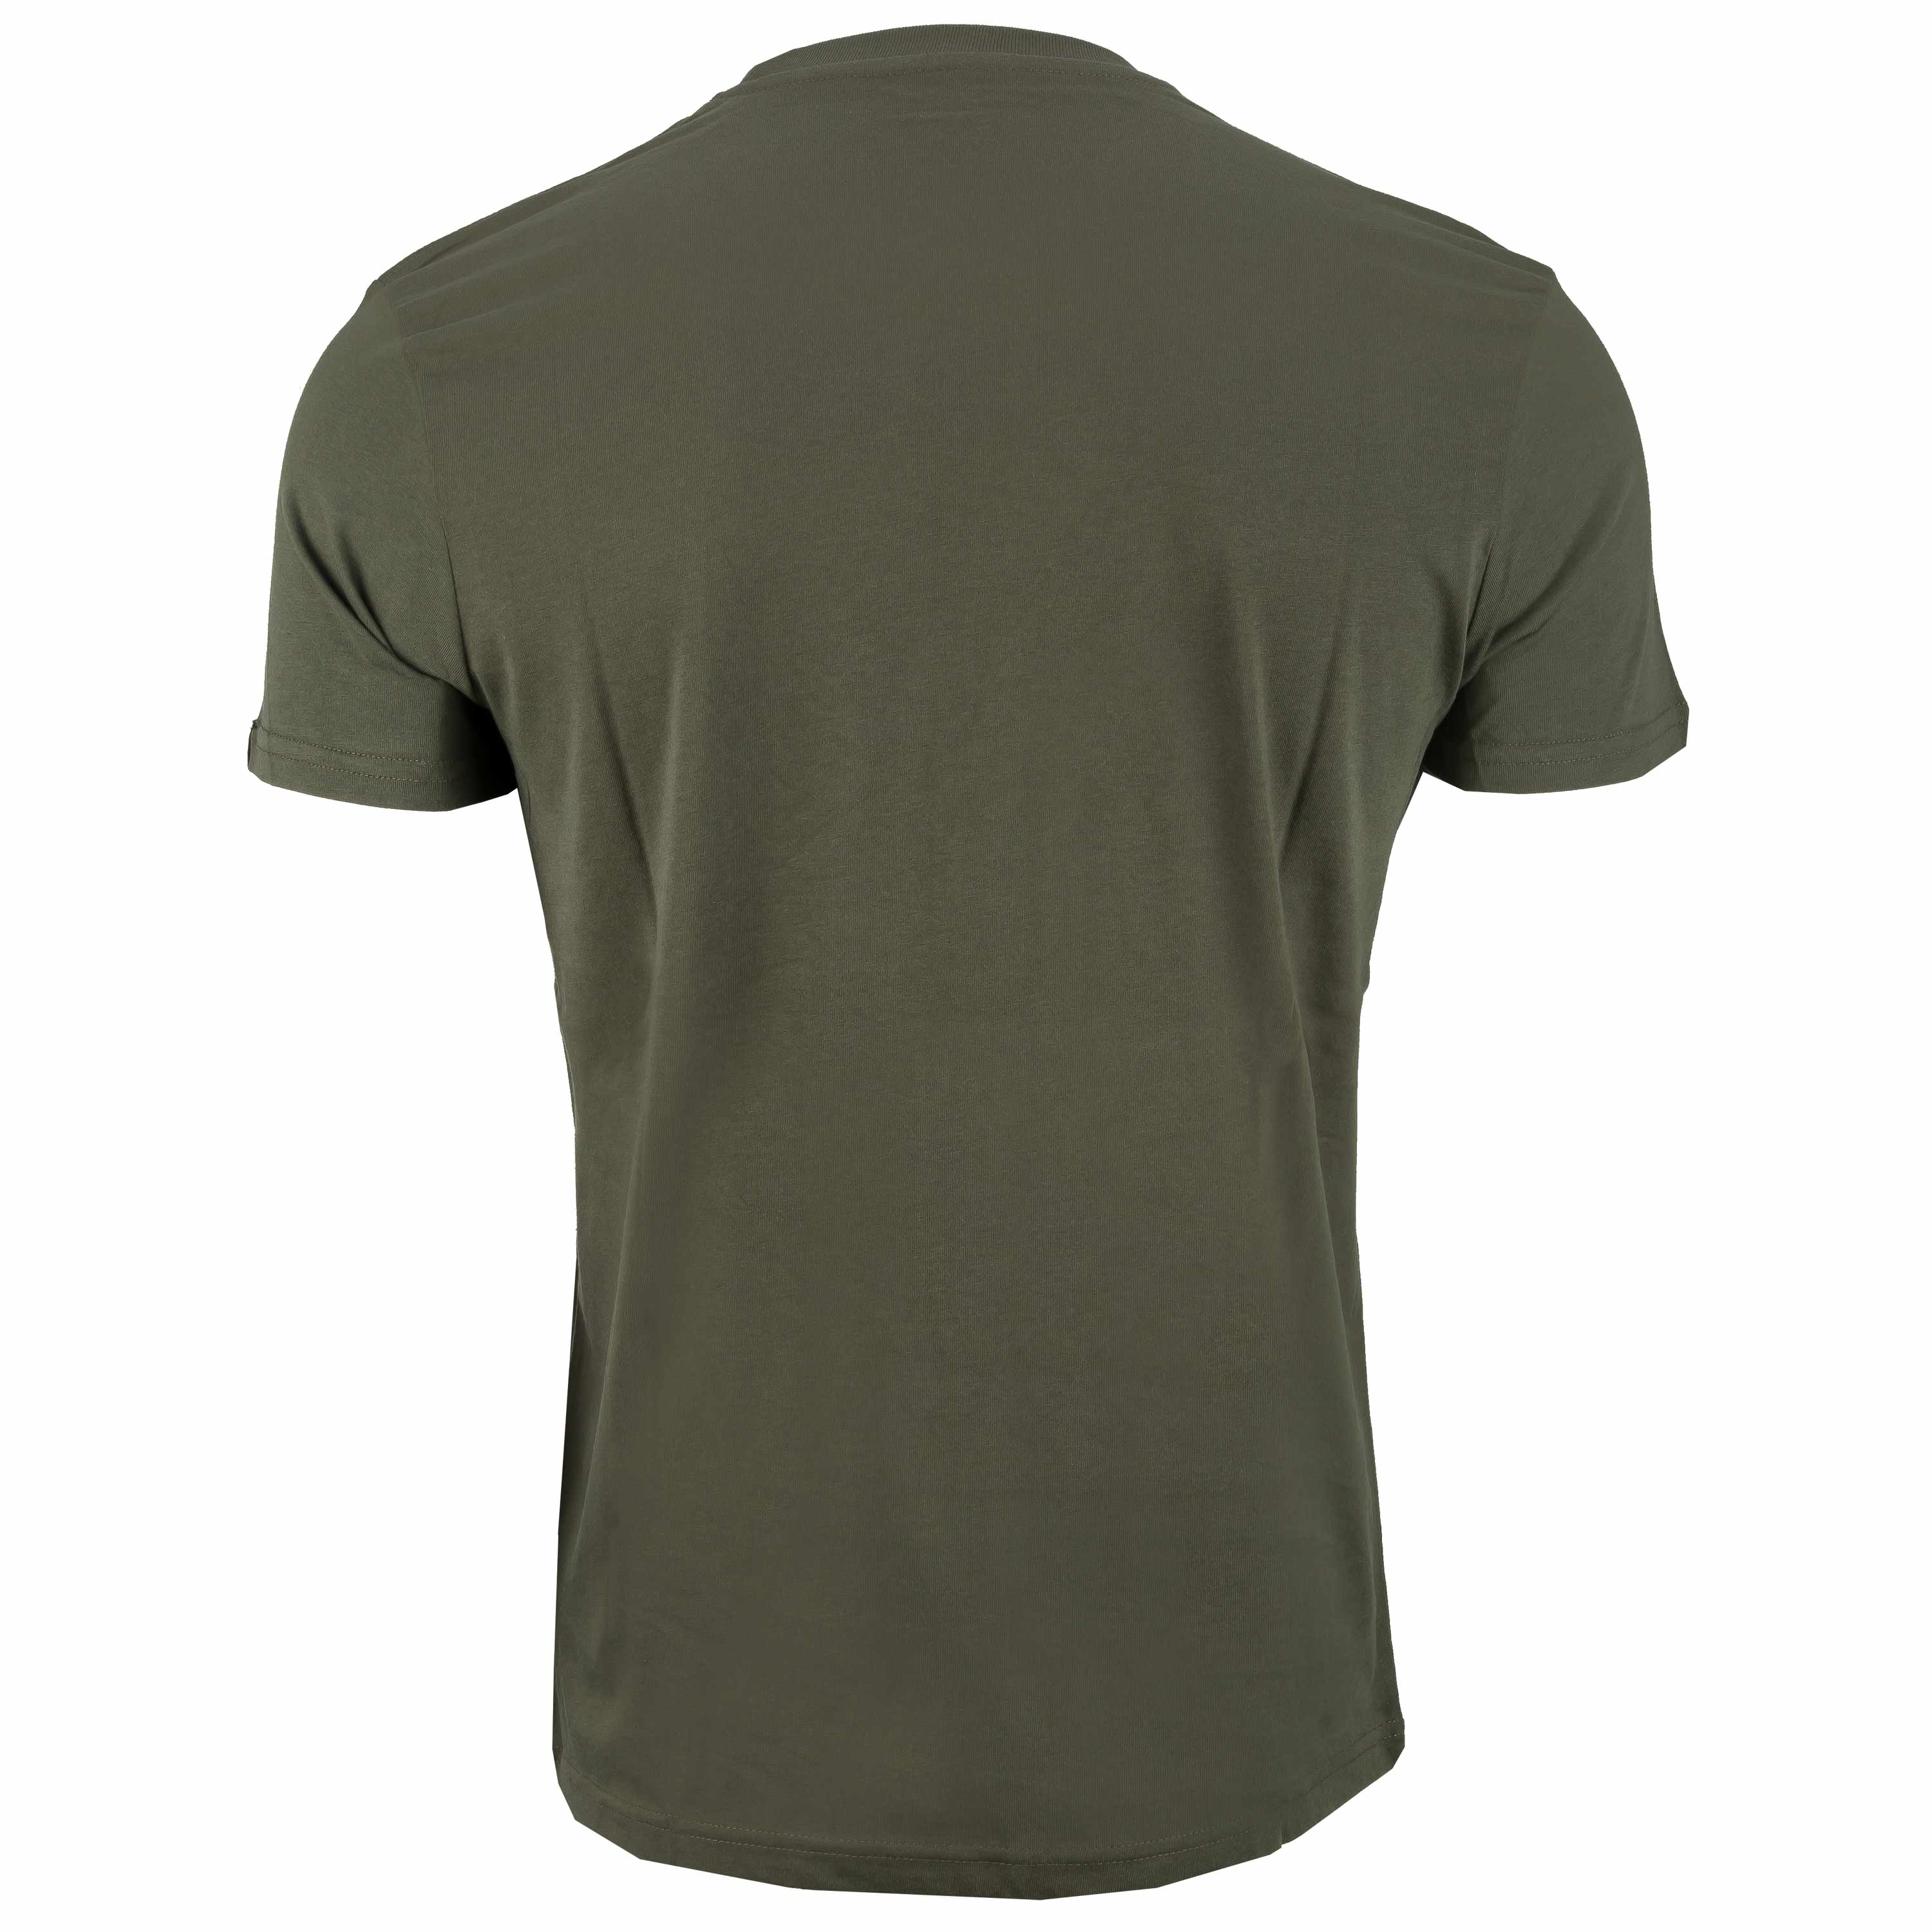 Purchase the Alpha Industries T-Shirt Patch dark olive Rubber T